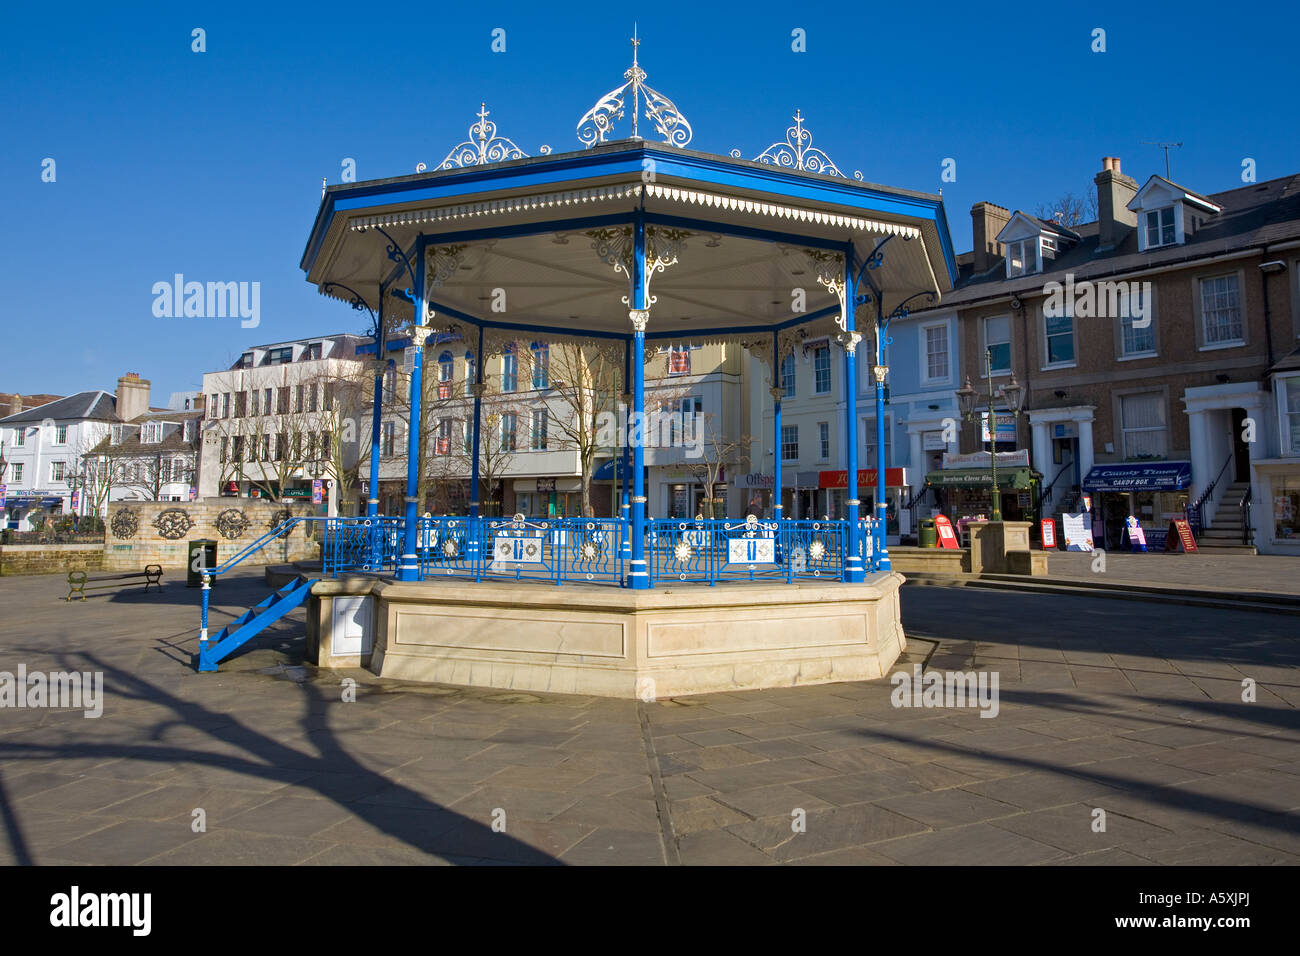 Attractive bandstand at Horsham town centre shopping Pedestrian precinct in West Sussex 2007 Stock Photo